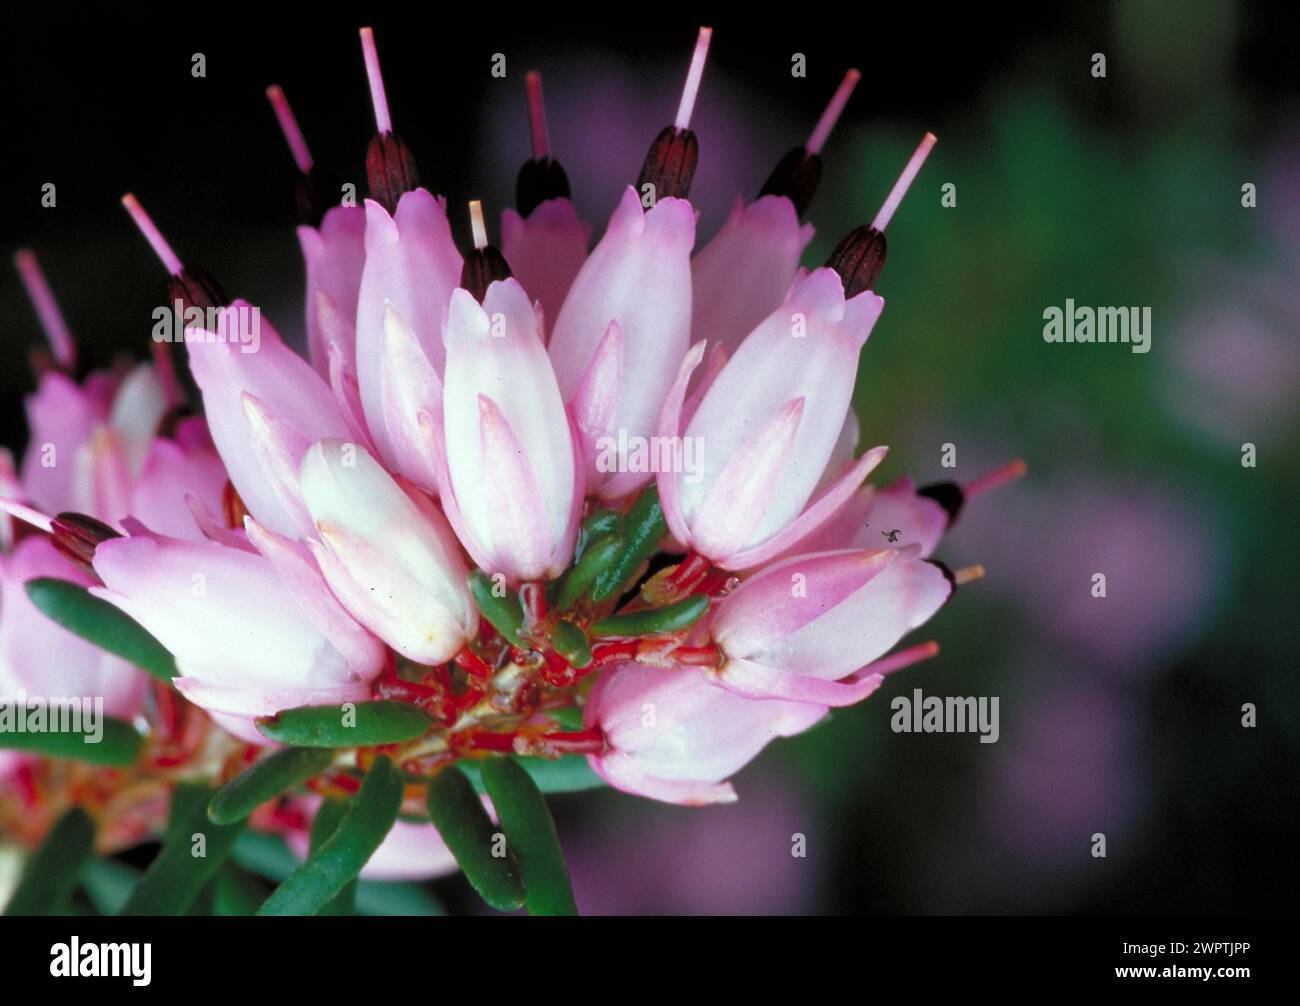 Pink flower clusters with green leaves and visible stamens Heather heath family (Ericaceae) Stock Photo